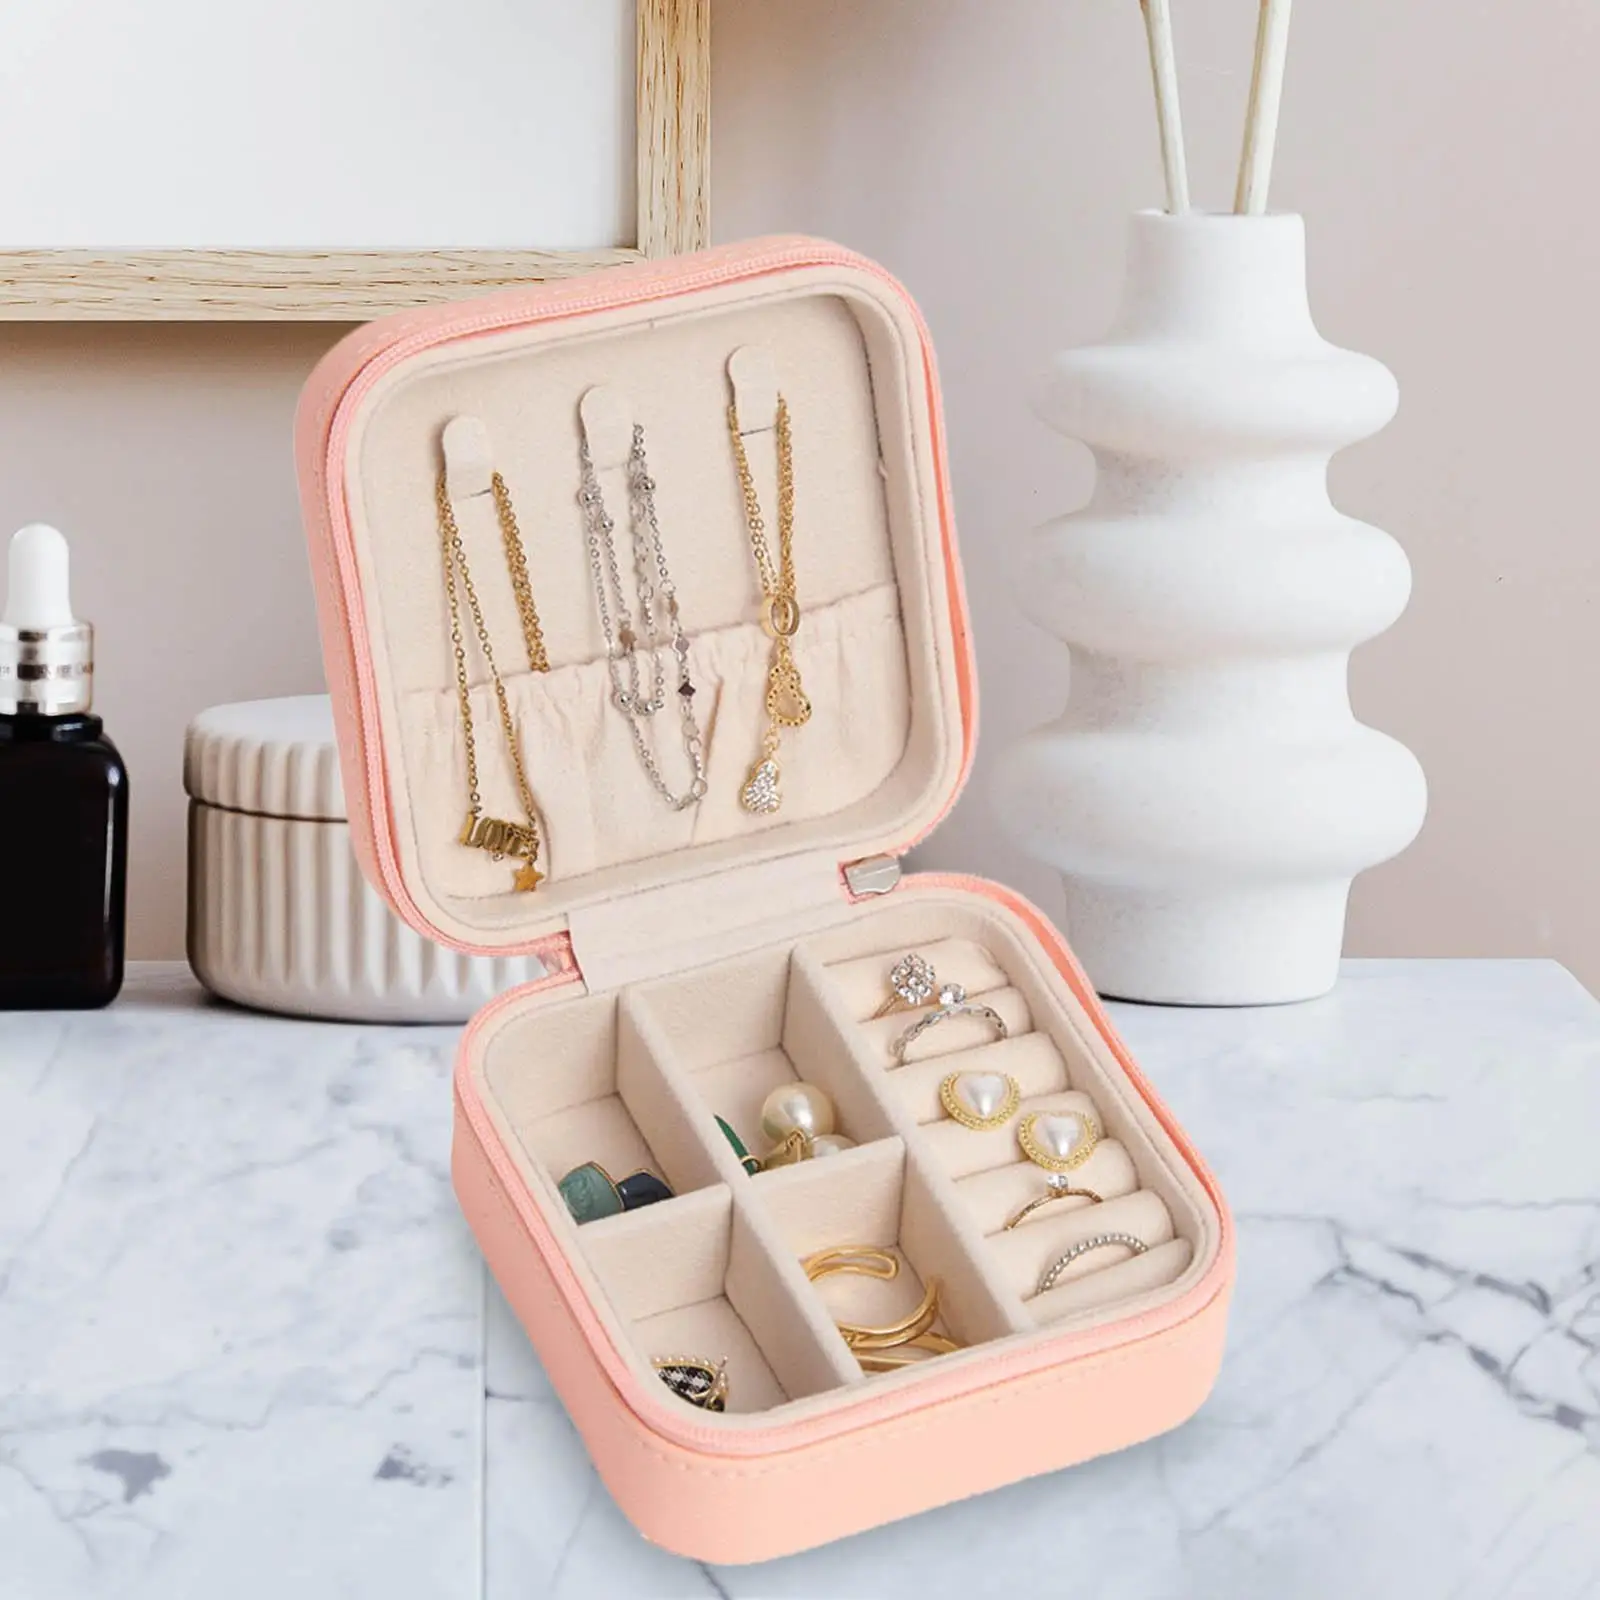 PU Leather Travel Jewelry Box Organizer Case Necklace Holder Display Storage Velvet Lined Container Portable for Rings Bracelets